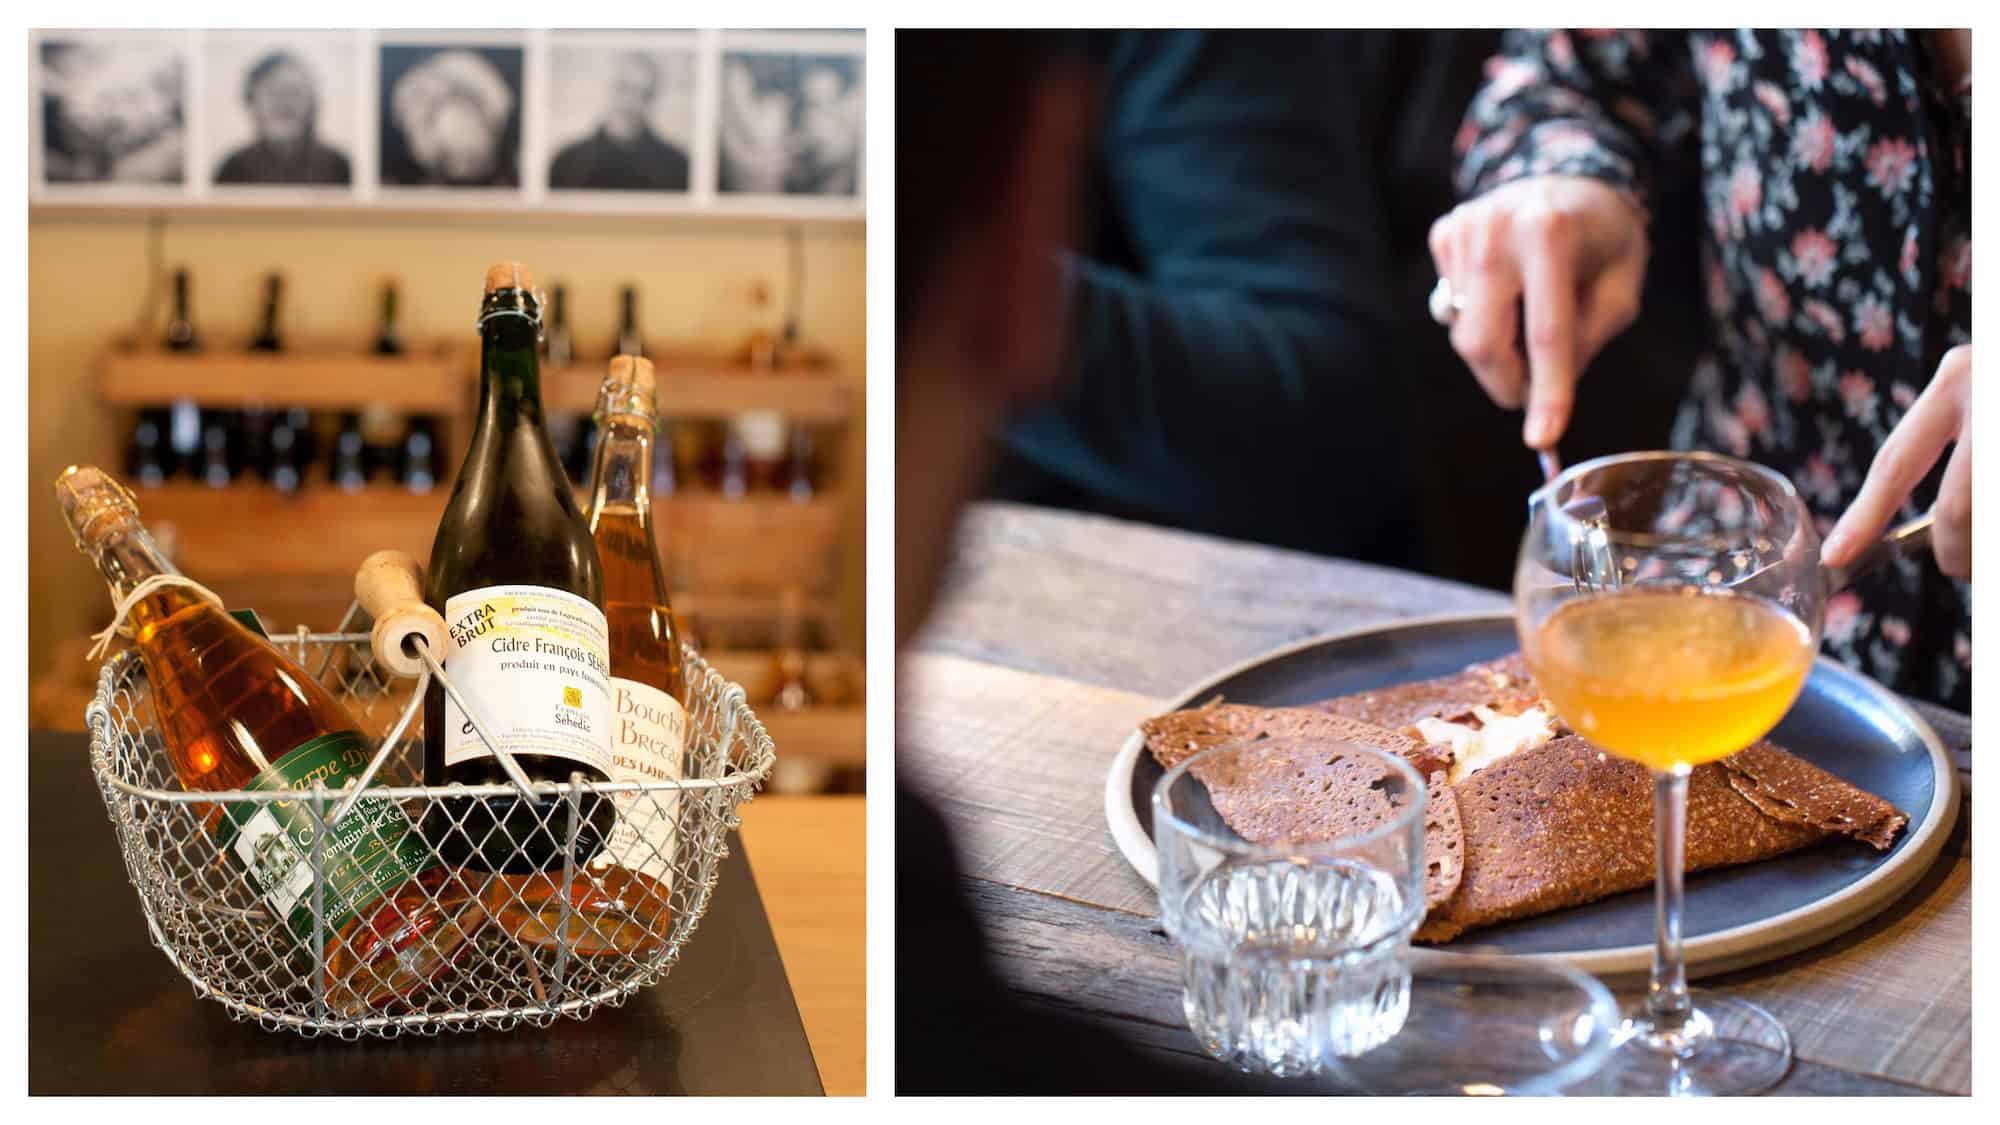 For the best gluten-free pancakes in Paris (right), head to Breizh Cafe, which also offers natural wines and ciders (left).